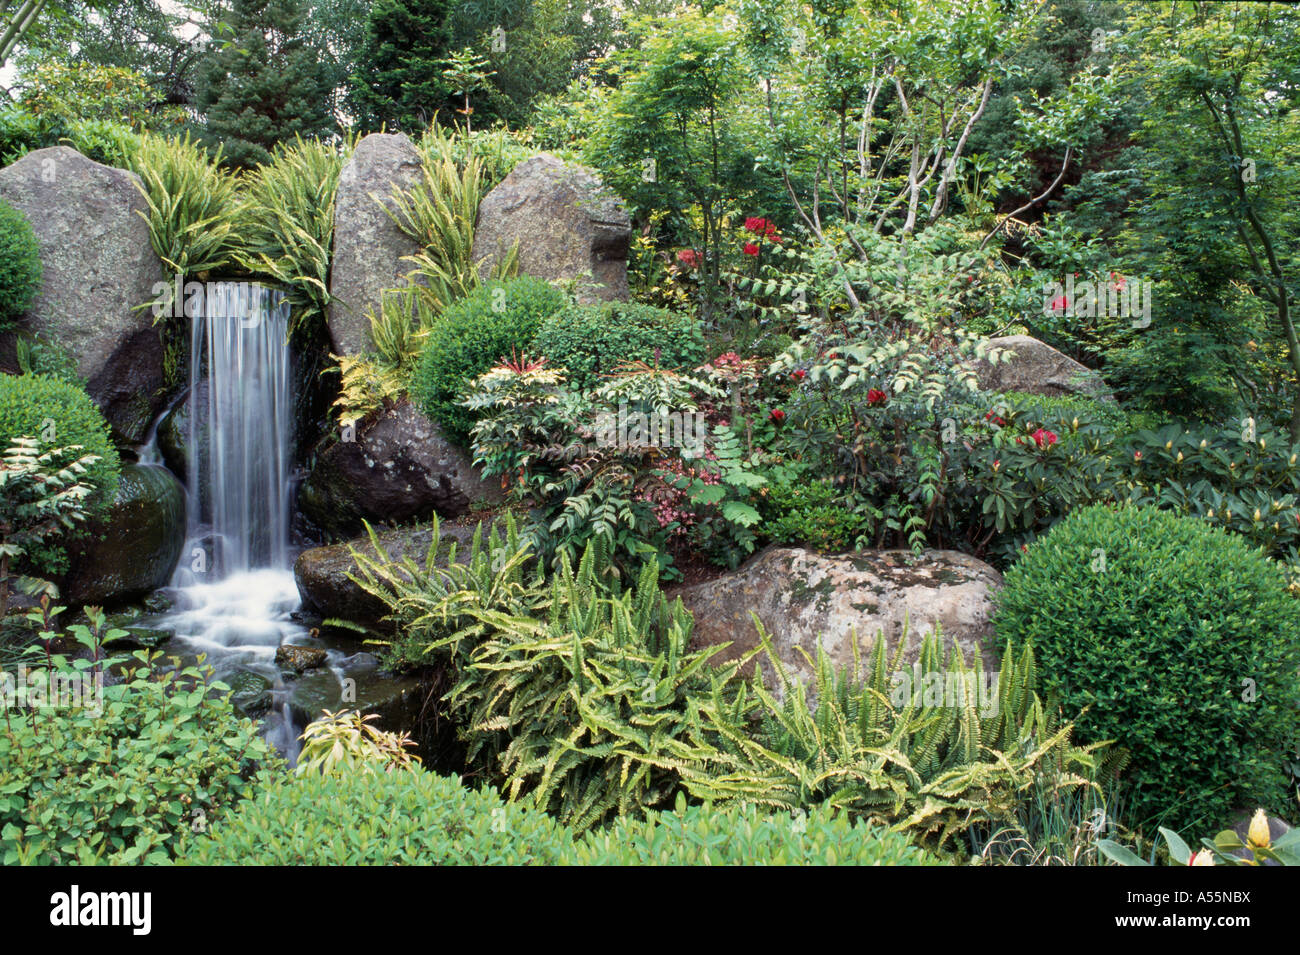 Waterfall pool lined with Hart s tongue fern and surrounded by evergreen trees and clipped shrubs Stock Photo